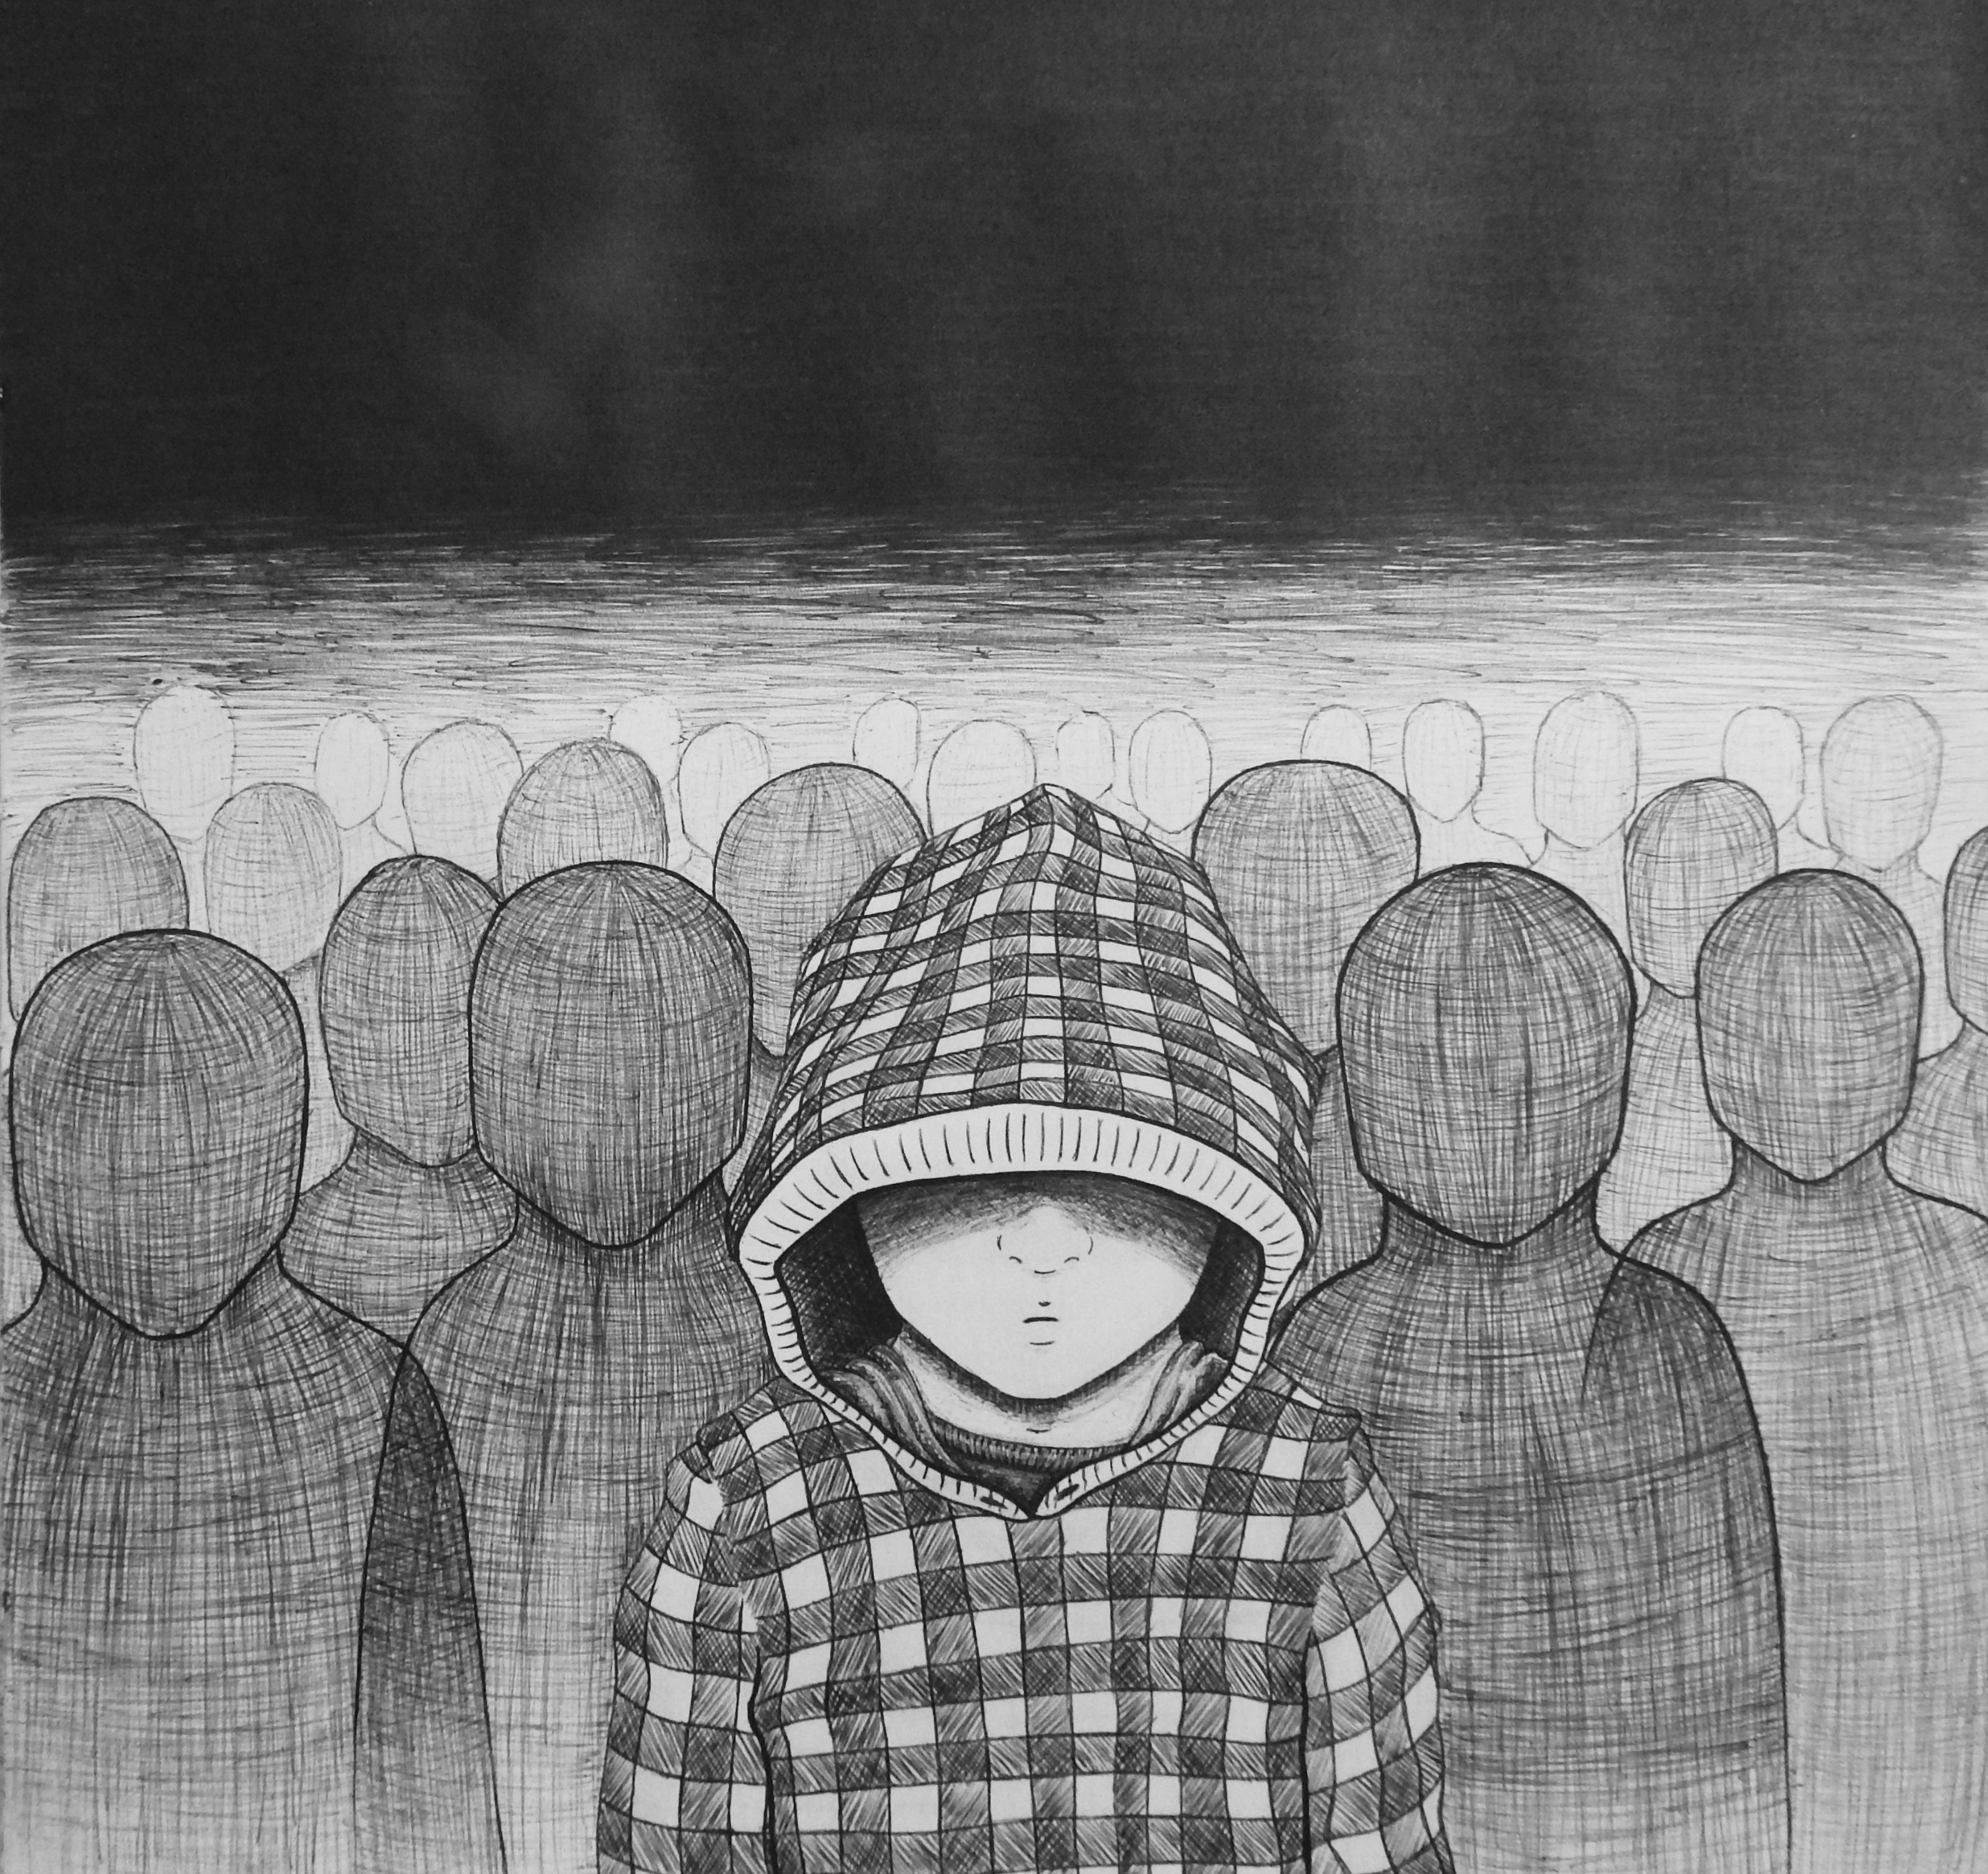 Alone in a crowd